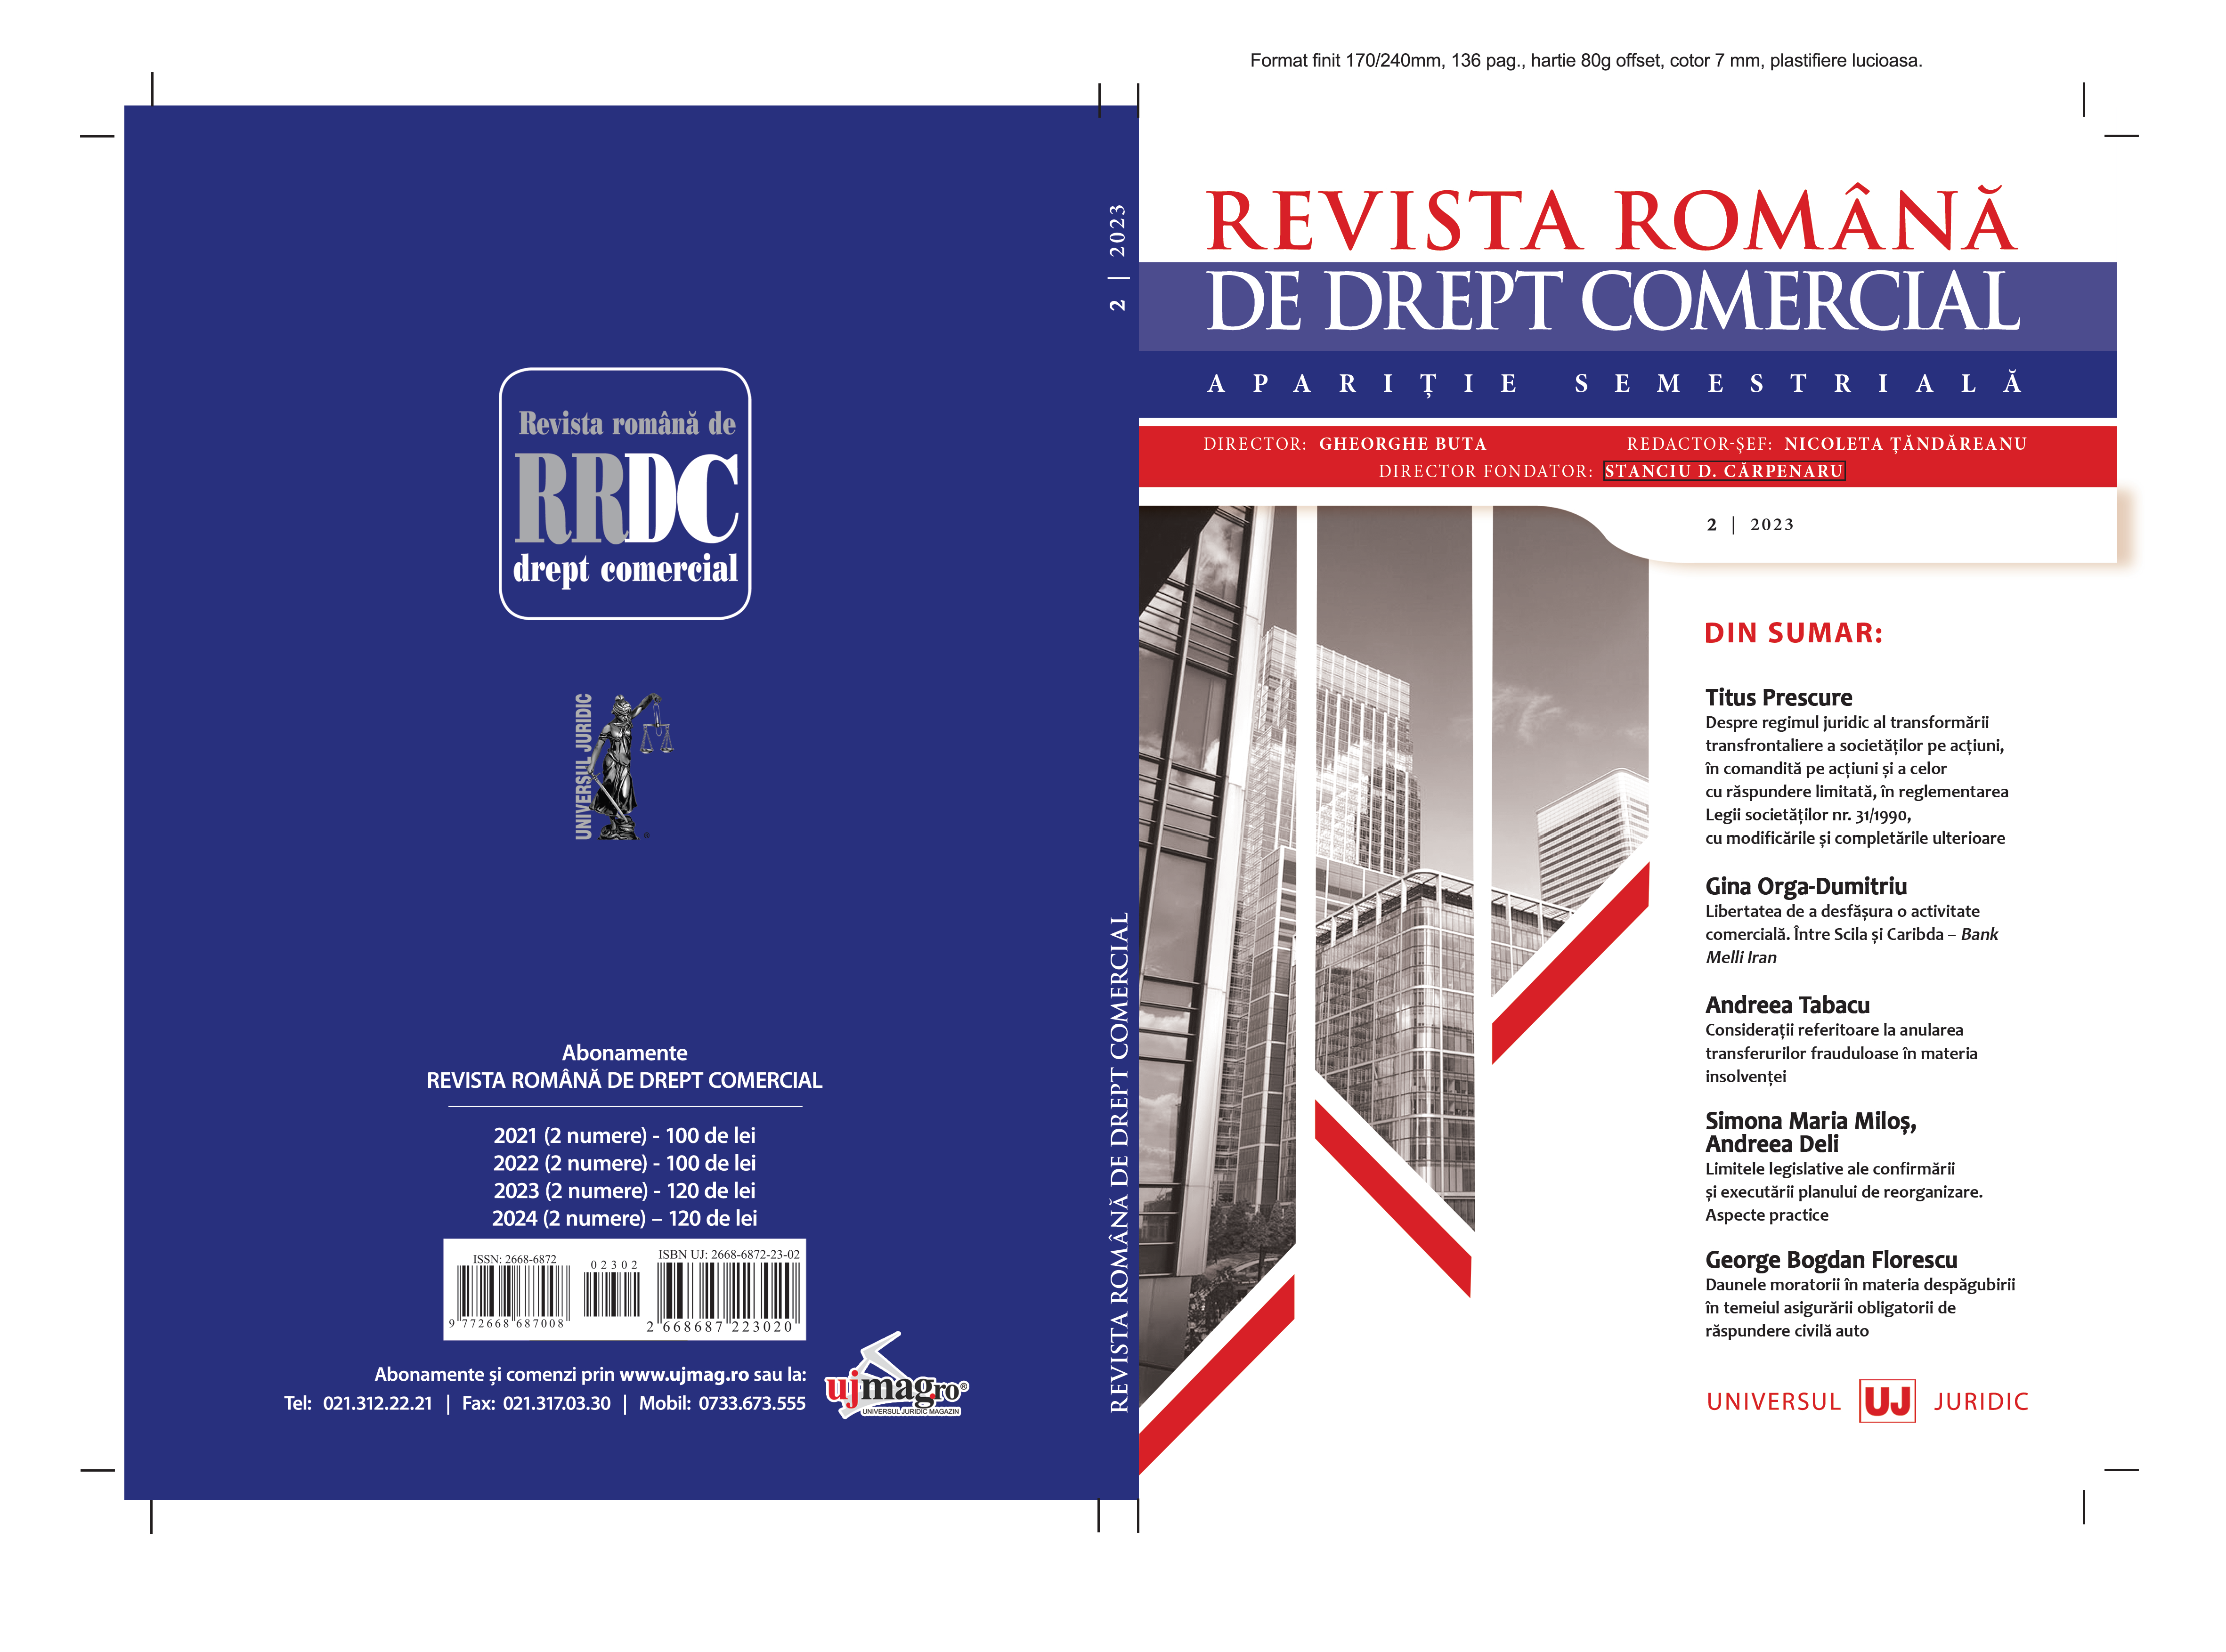 A Decent Requiem? Stanciu D. Cărpenaru National Commercial Law Conference – the 3rd Edition 16 November 2023? A Resolution, an Appeal; a Manifesto? Cover Image